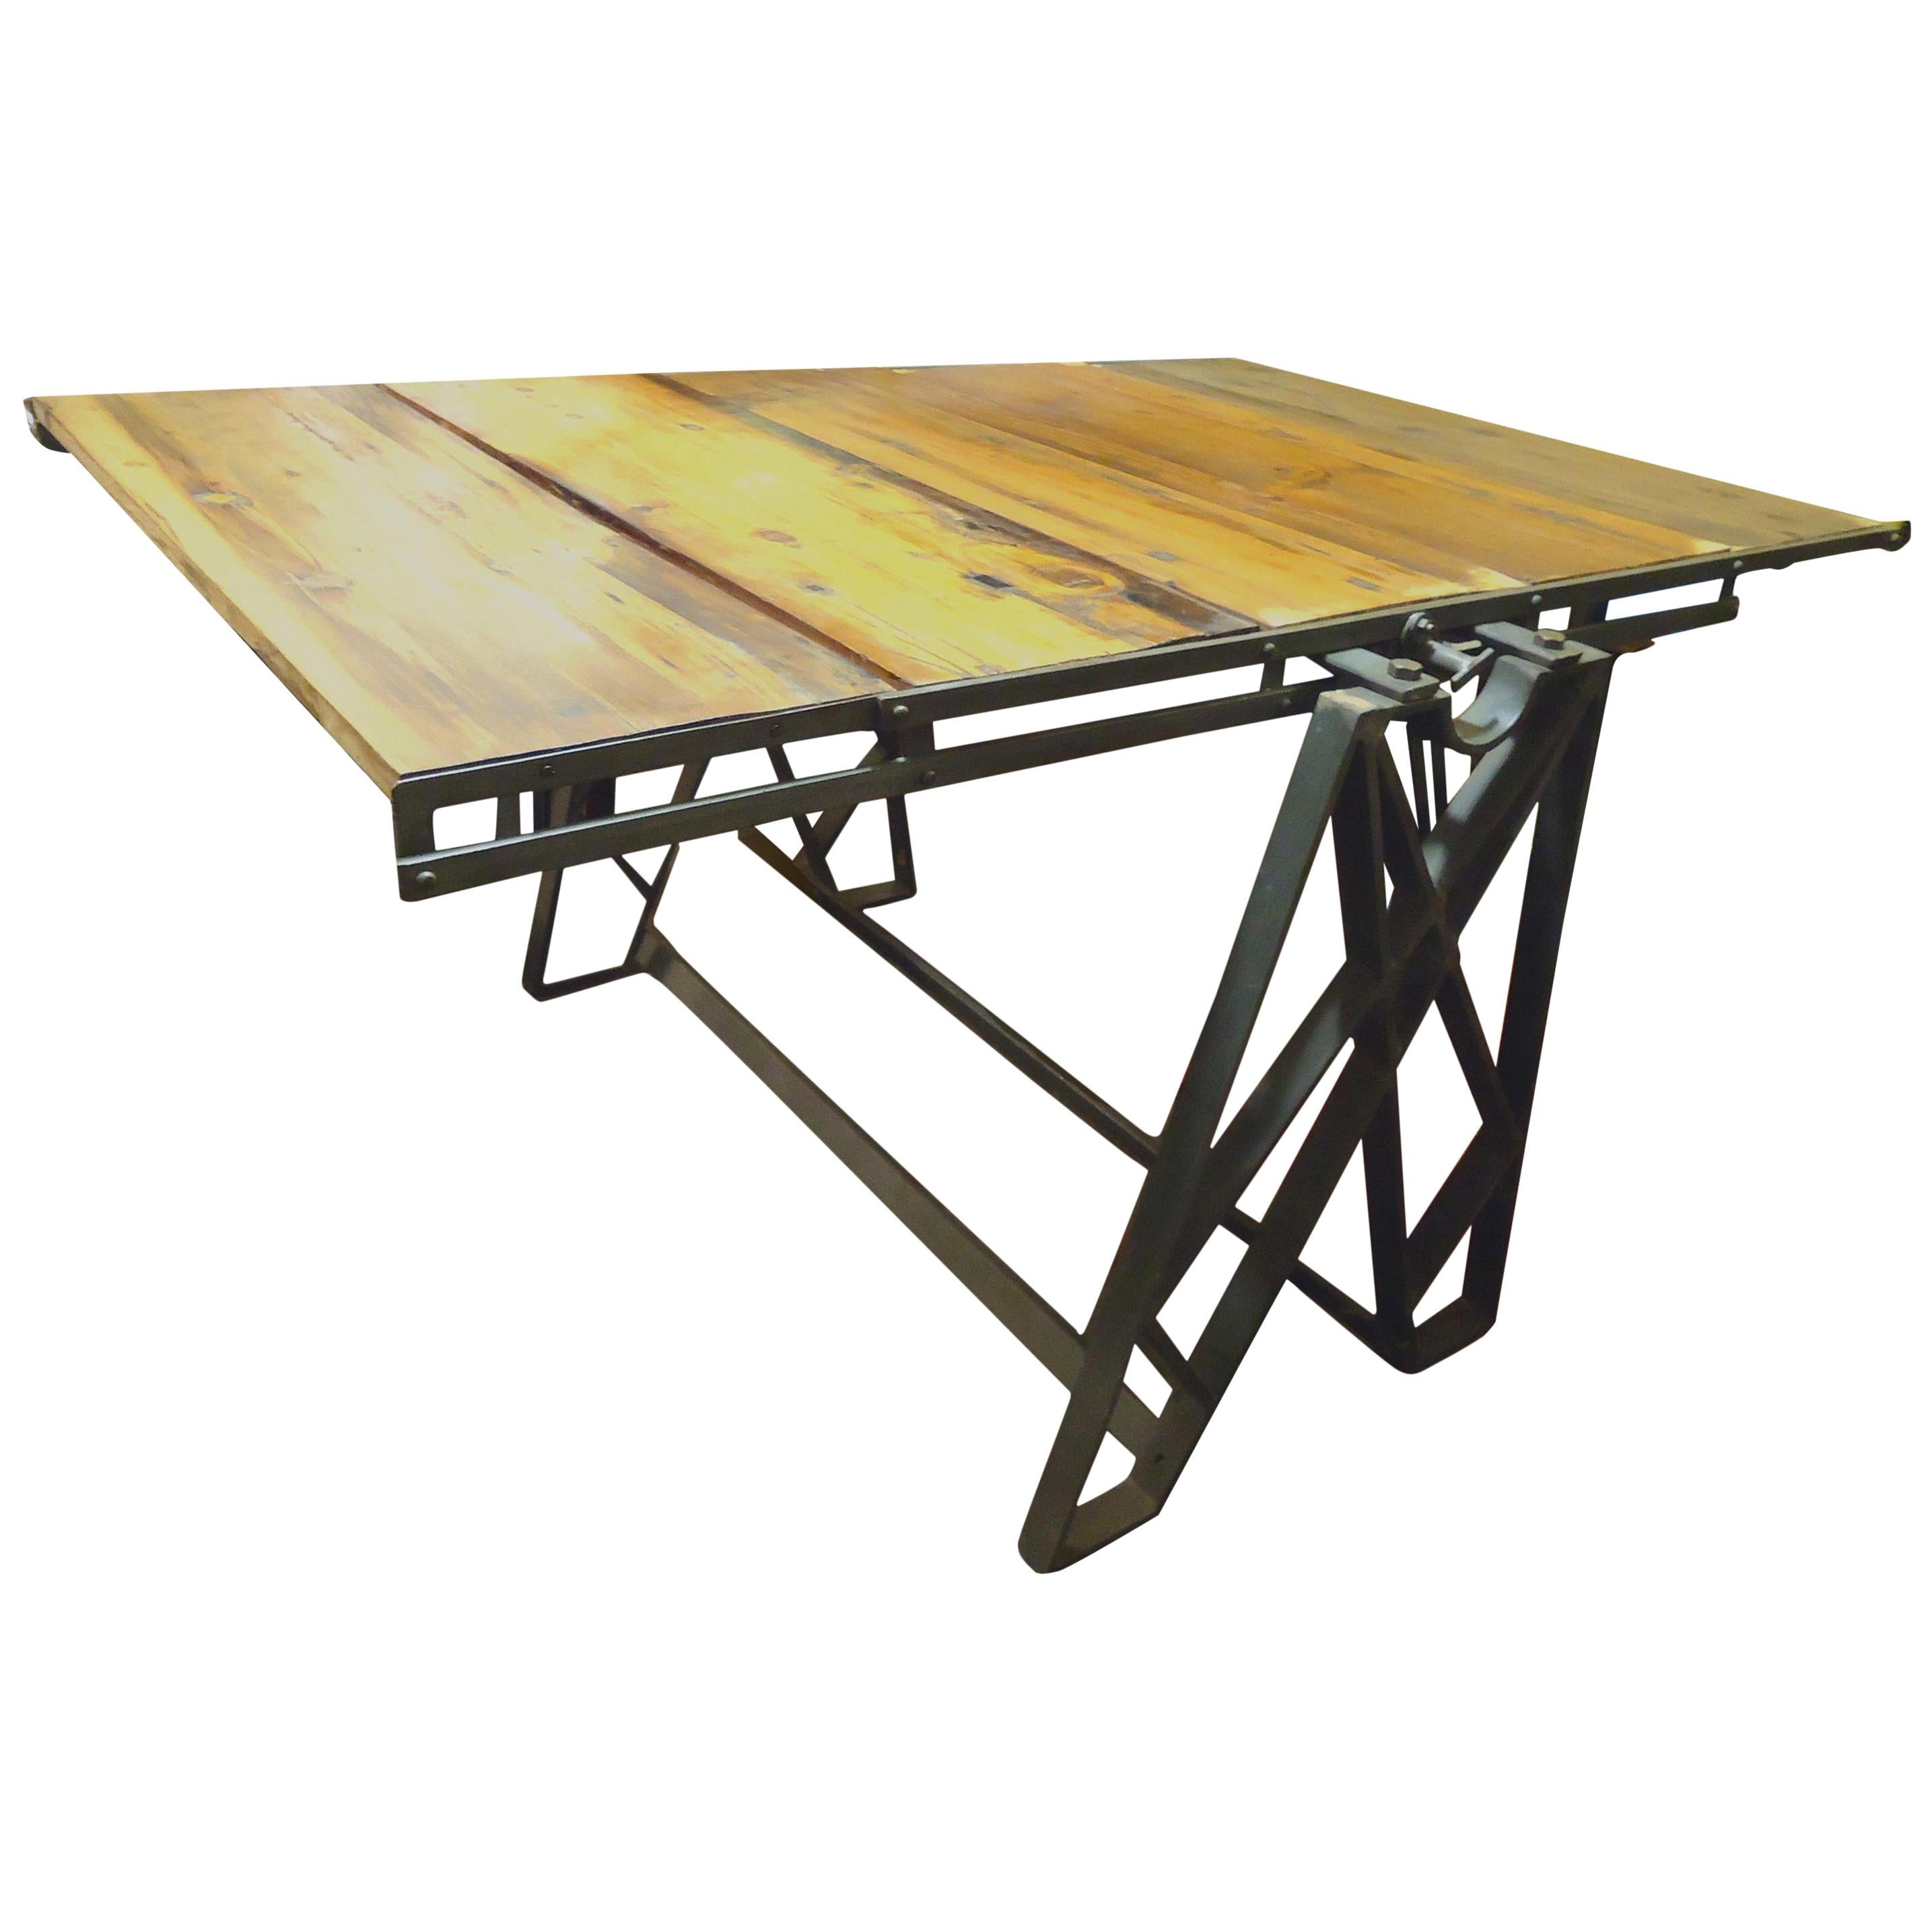 2-in-1 Industrial Bookcase or Dining Table